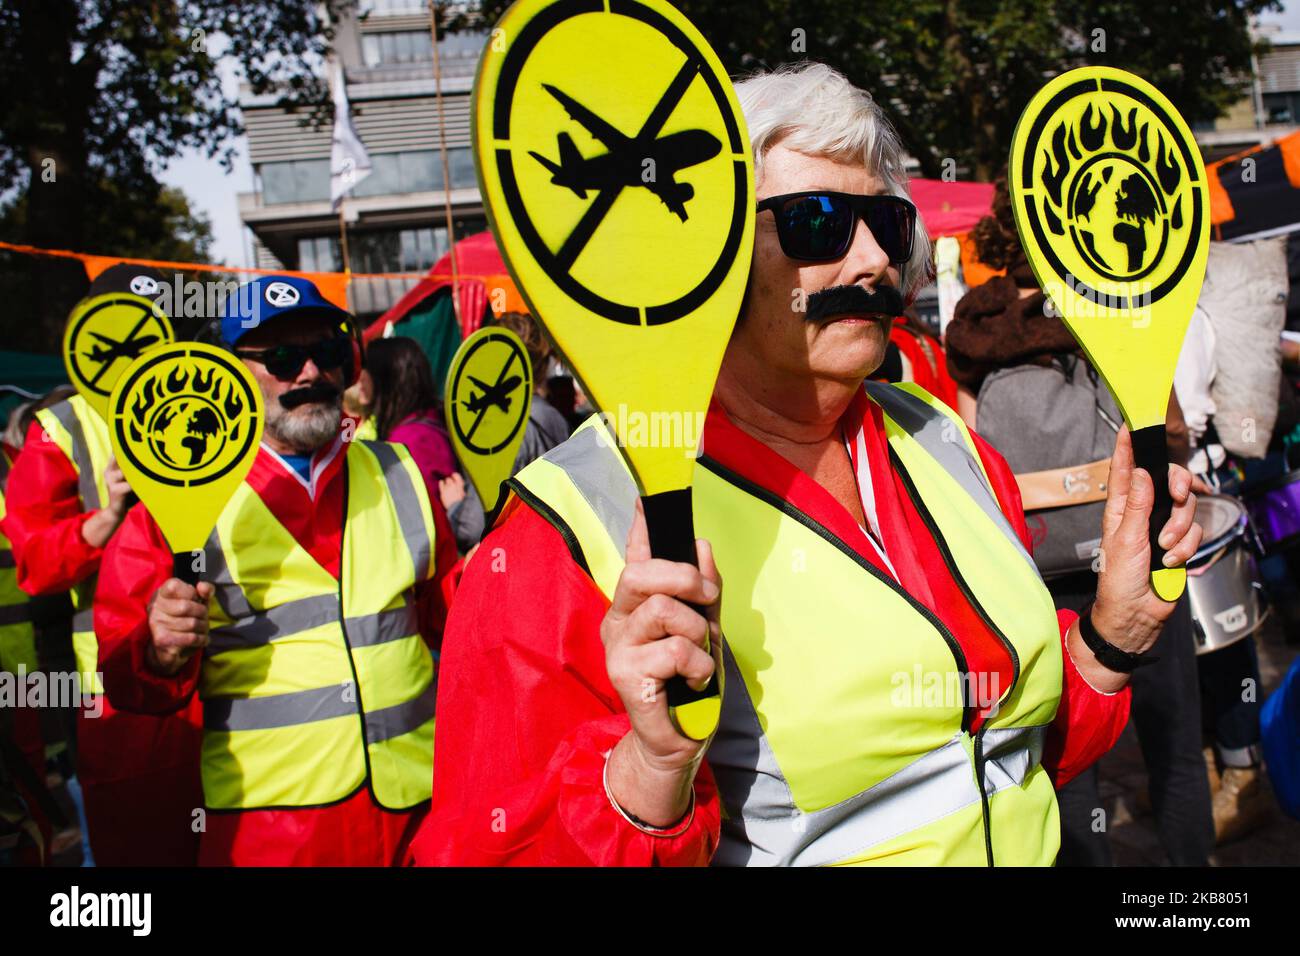 Members of climate change activist movement Extinction Rebellion (XR) dressed as air traffic controllers, with paddles bearing anti-aviation logos, demonstrate on Victoria Street on the third day of the group's 'International Rebellion' in London, England, on October 9, 2019. Police officers today continued to clear demonstrators and tents from sites across Westminster, with activists having been warned yesterday that they must move to a designated protest area around Nelson's Column in Trafalgar Square or face arrest. Similar blockades by Extinction Rebellion in April, at sites including Oxfo Stock Photo